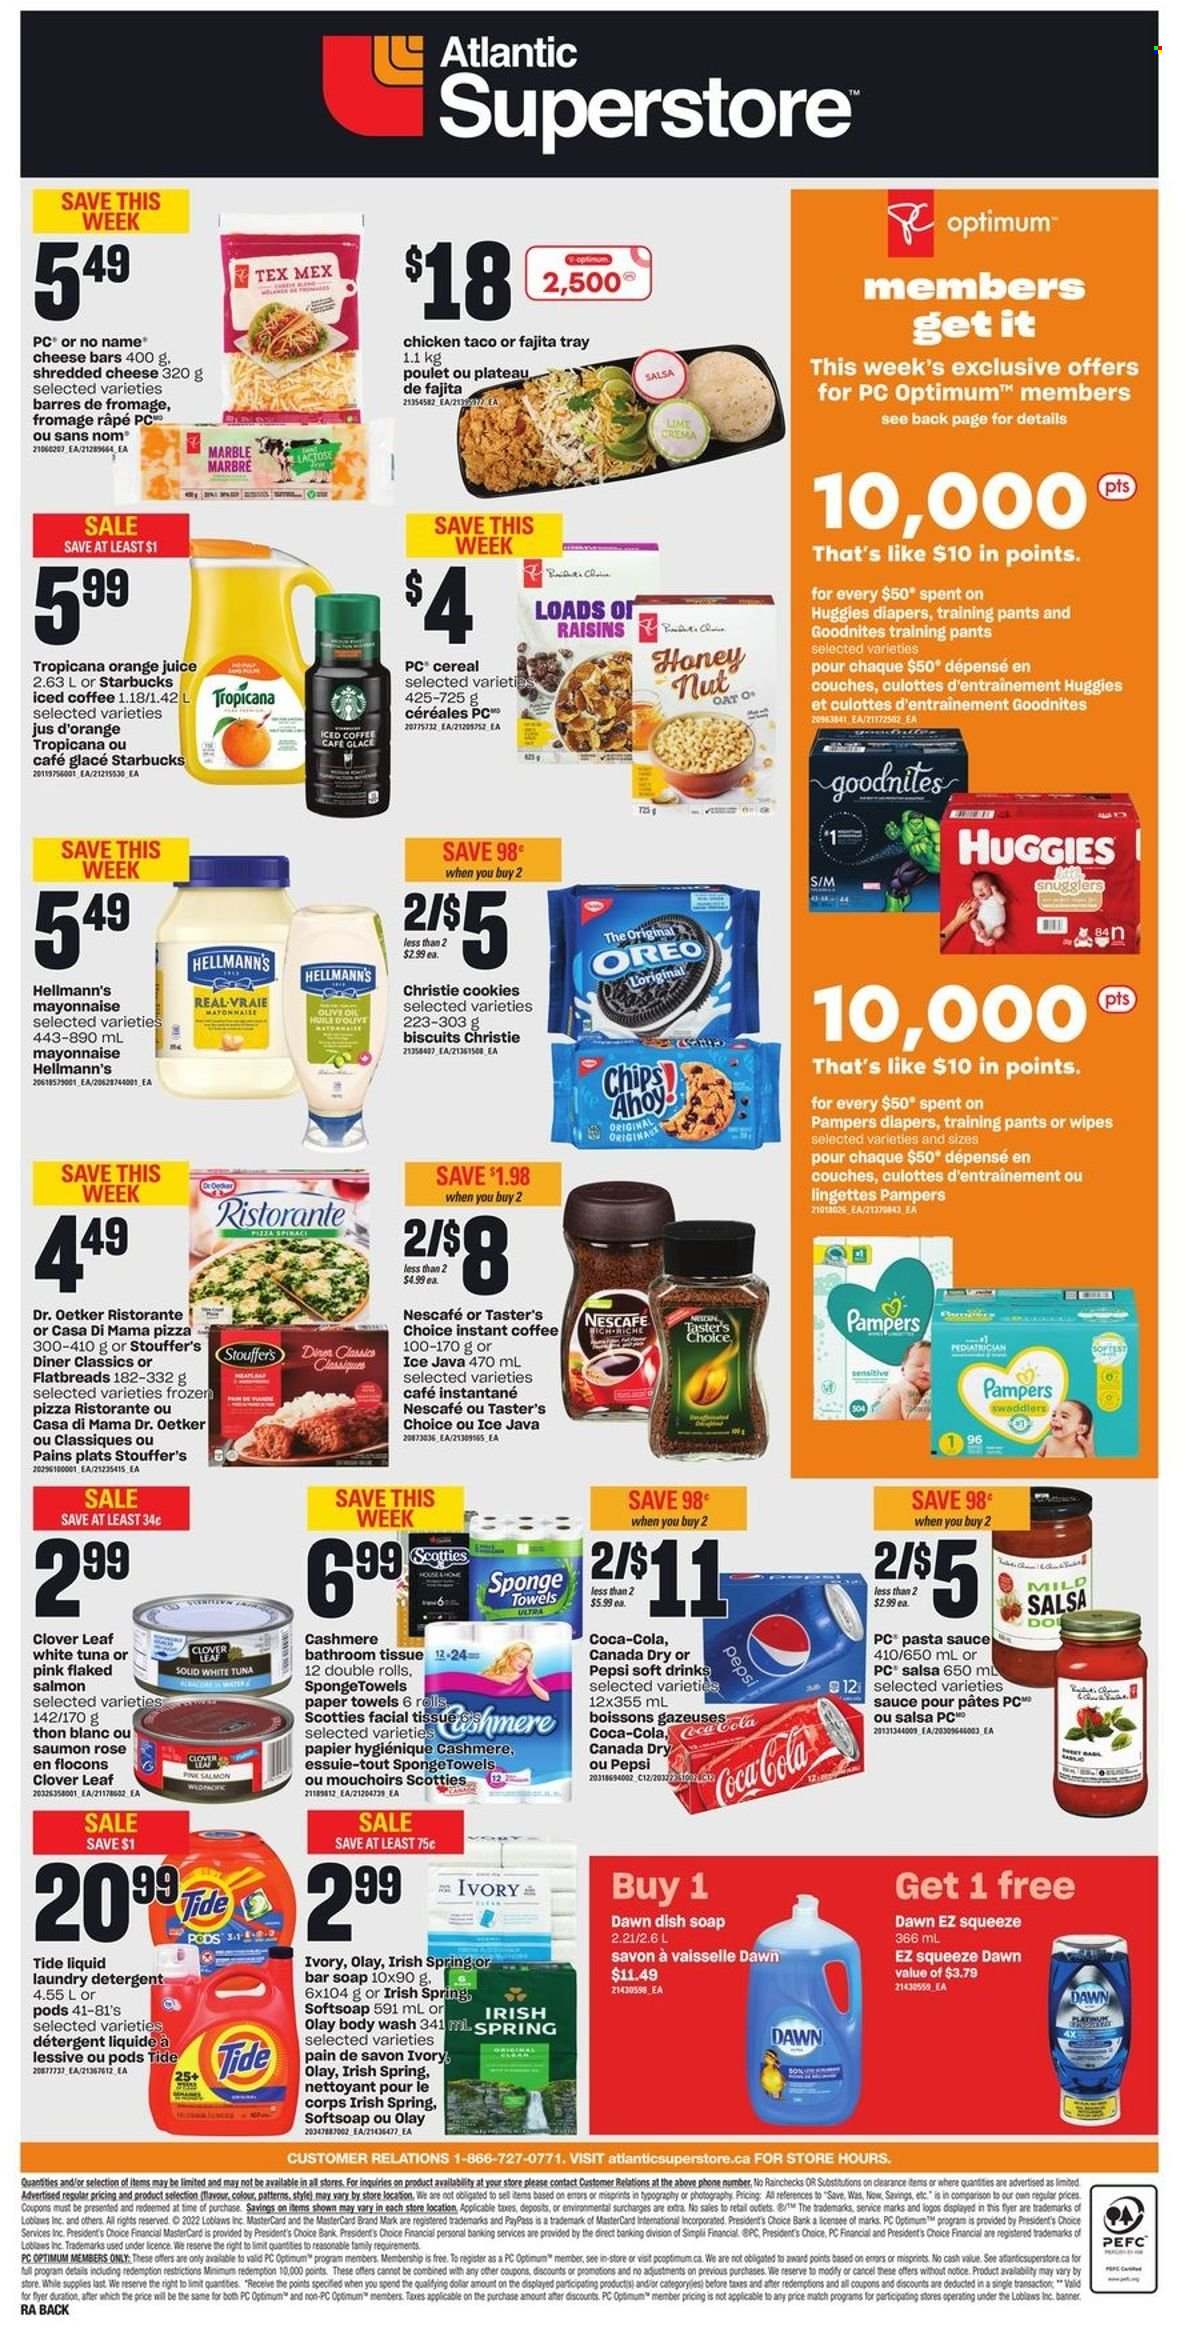 thumbnail - Atlantic Superstore Flyer - May 19, 2022 - May 25, 2022 - Sales products - salmon, tuna, No Name, pizza, pasta sauce, sauce, fajita, shredded cheese, Dr. Oetker, Président, Clover, mayonnaise, Hellmann’s, Stouffer's, cookies, biscuit, oats, cereals, salsa, oil, Canada Dry, Coca-Cola, Pepsi, orange juice, juice, soft drink, iced coffee, instant coffee, Starbucks, rosé wine, wipes, pants, nappies, baby pants, bath tissue, kitchen towels, paper towels, Tide, laundry detergent, body wash, Softsoap, soap bar, soap, Olay, Optimum, rose, detergent, Huggies, Pampers, Oreo, Nescafé. Page 2.